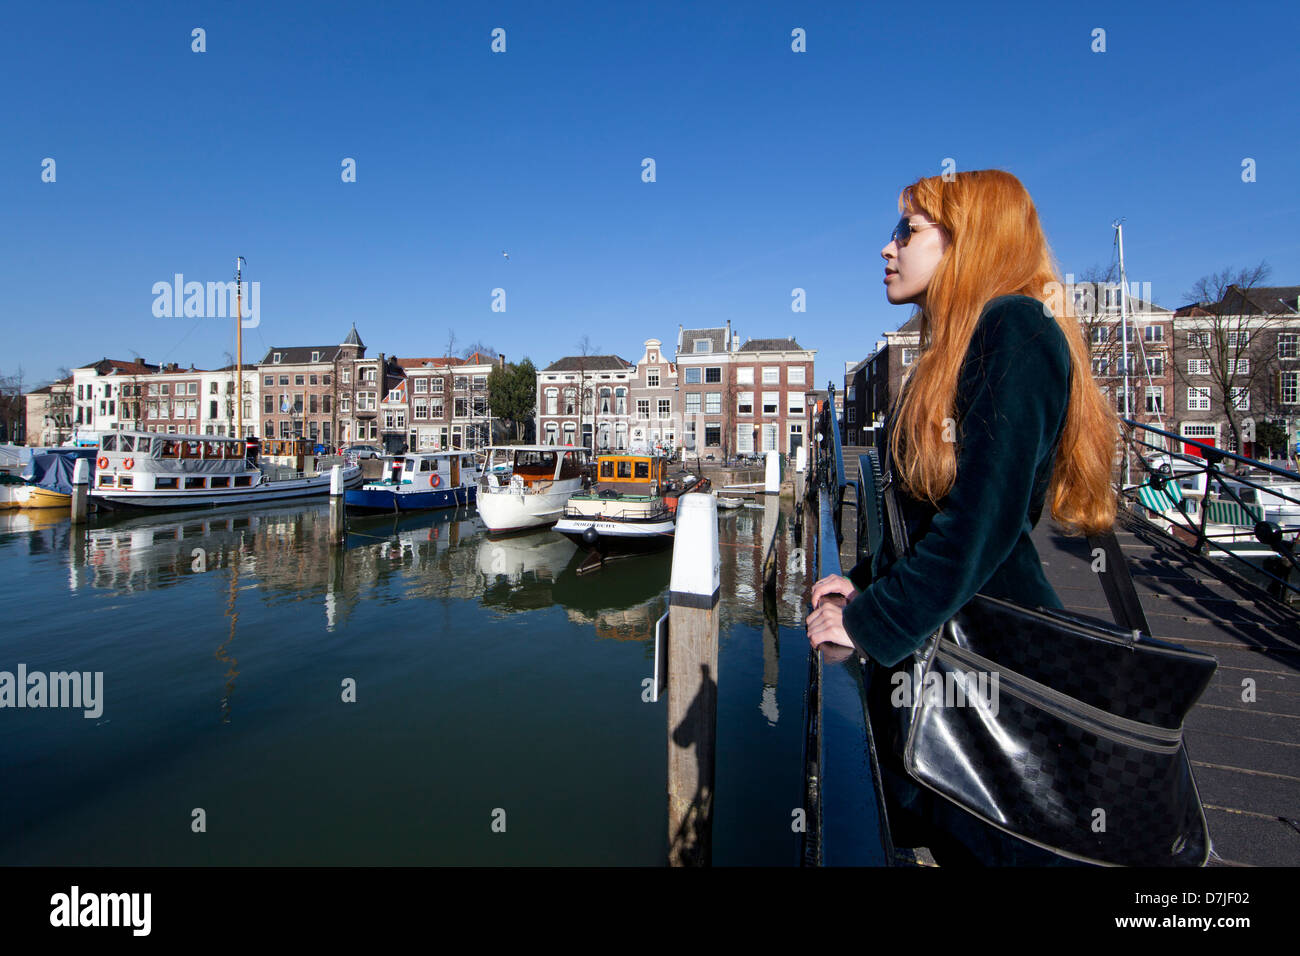 redhair in Netherlands Stock Photo